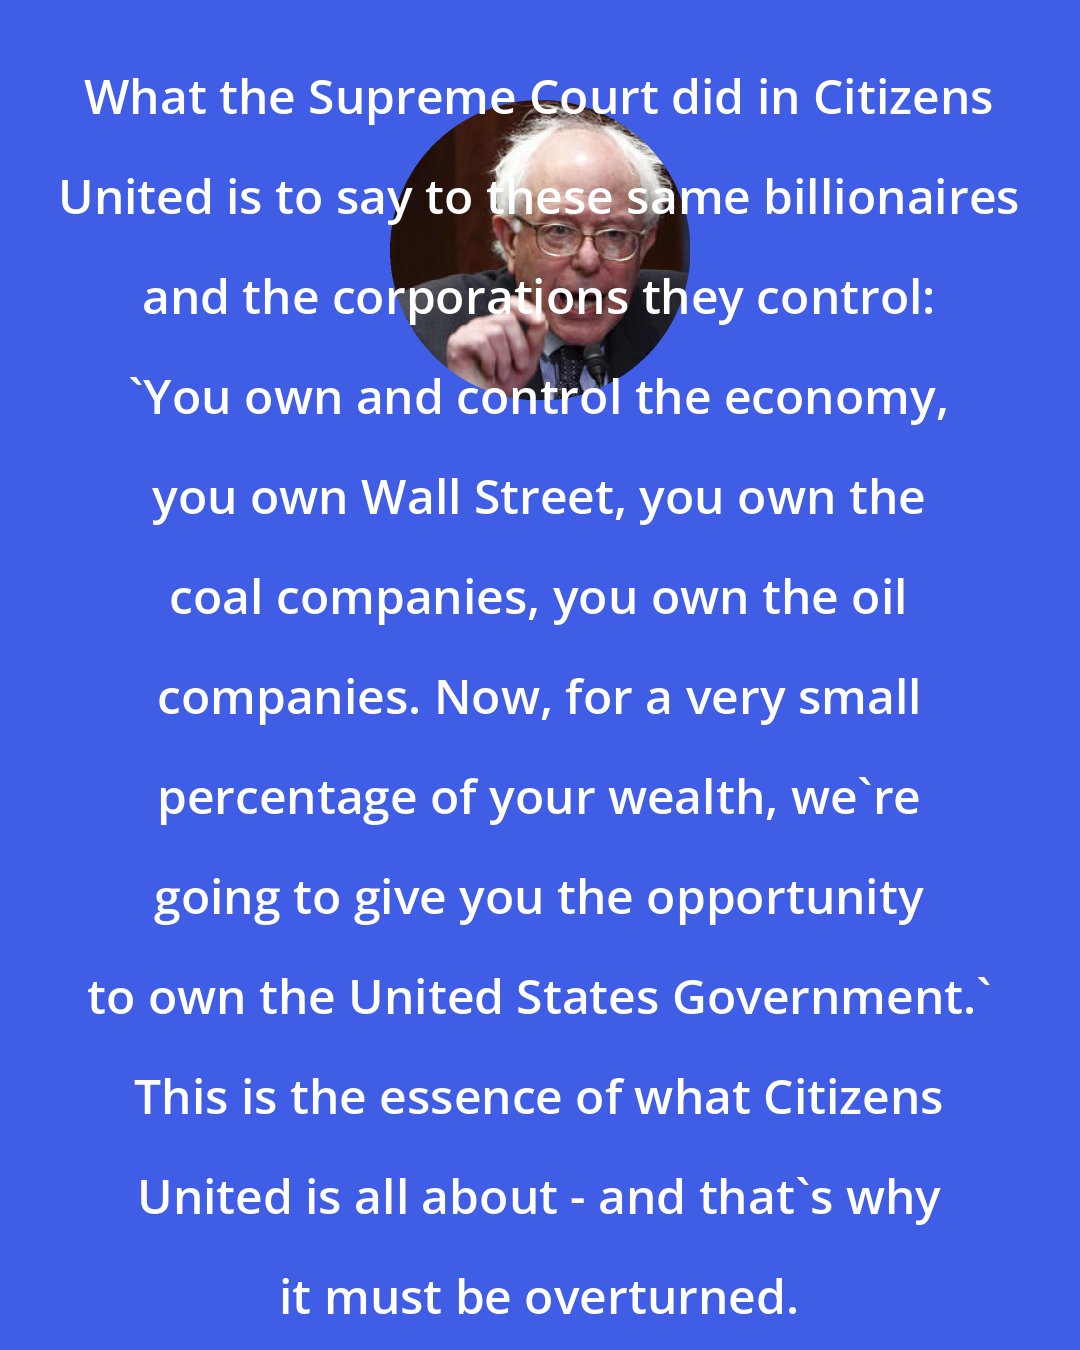 Bernie Sanders: What the Supreme Court did in Citizens United is to say to these same billionaires and the corporations they control: 'You own and control the economy, you own Wall Street, you own the coal companies, you own the oil companies. Now, for a very small percentage of your wealth, we're going to give you the opportunity to own the United States Government.' This is the essence of what Citizens United is all about - and that's why it must be overturned.